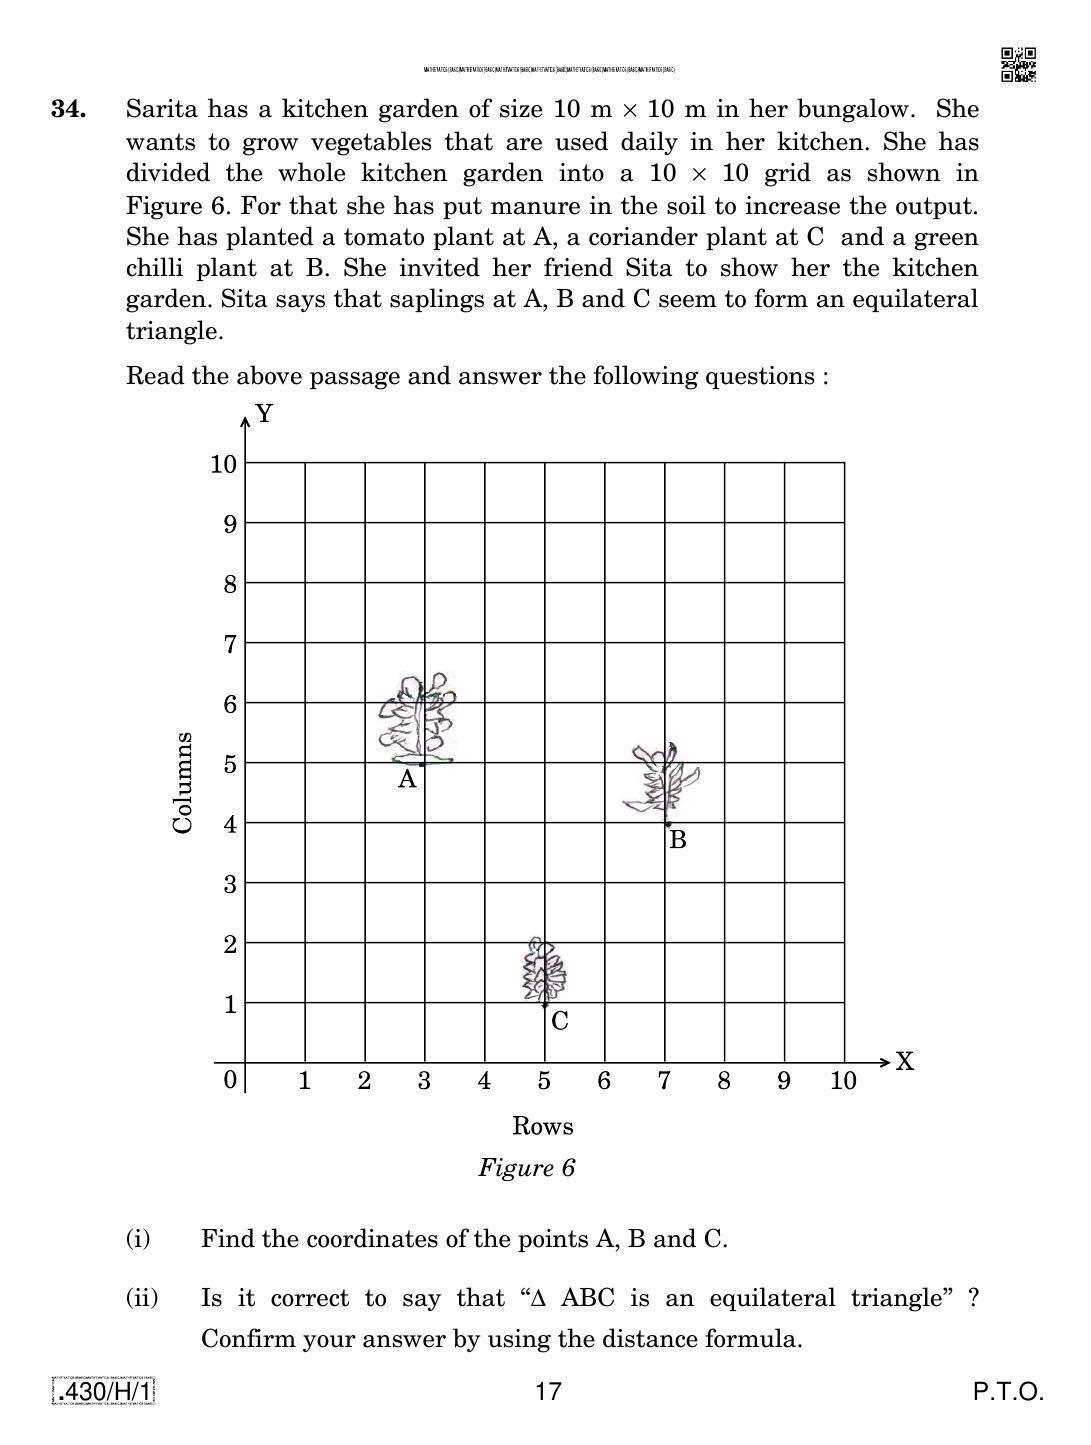 CBSE Class 10 430-C-1 - Maths (Basic) 2020 Compartment Question Paper - Page 17